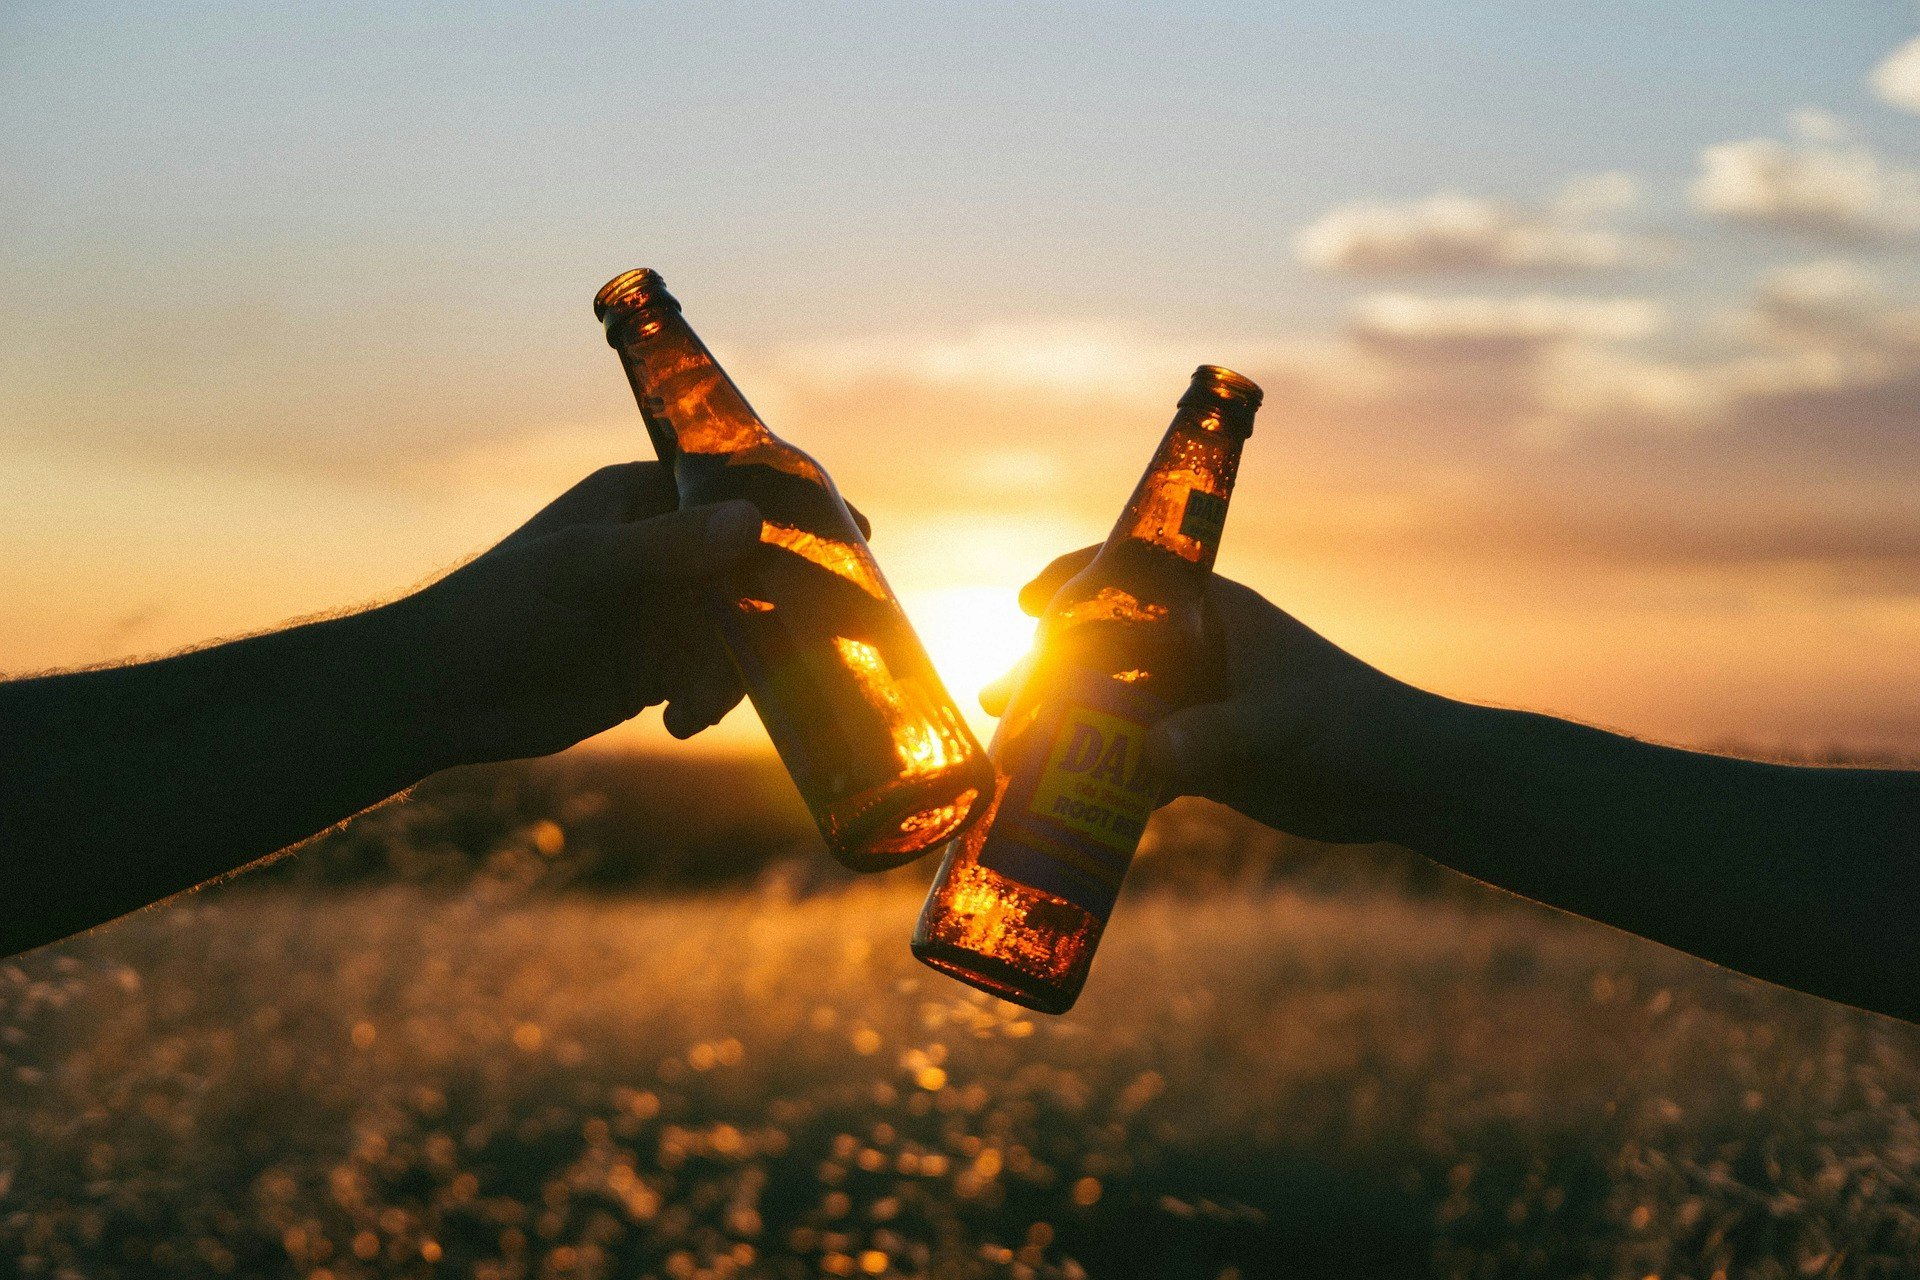 Two people cheersing their beers against a sunset.